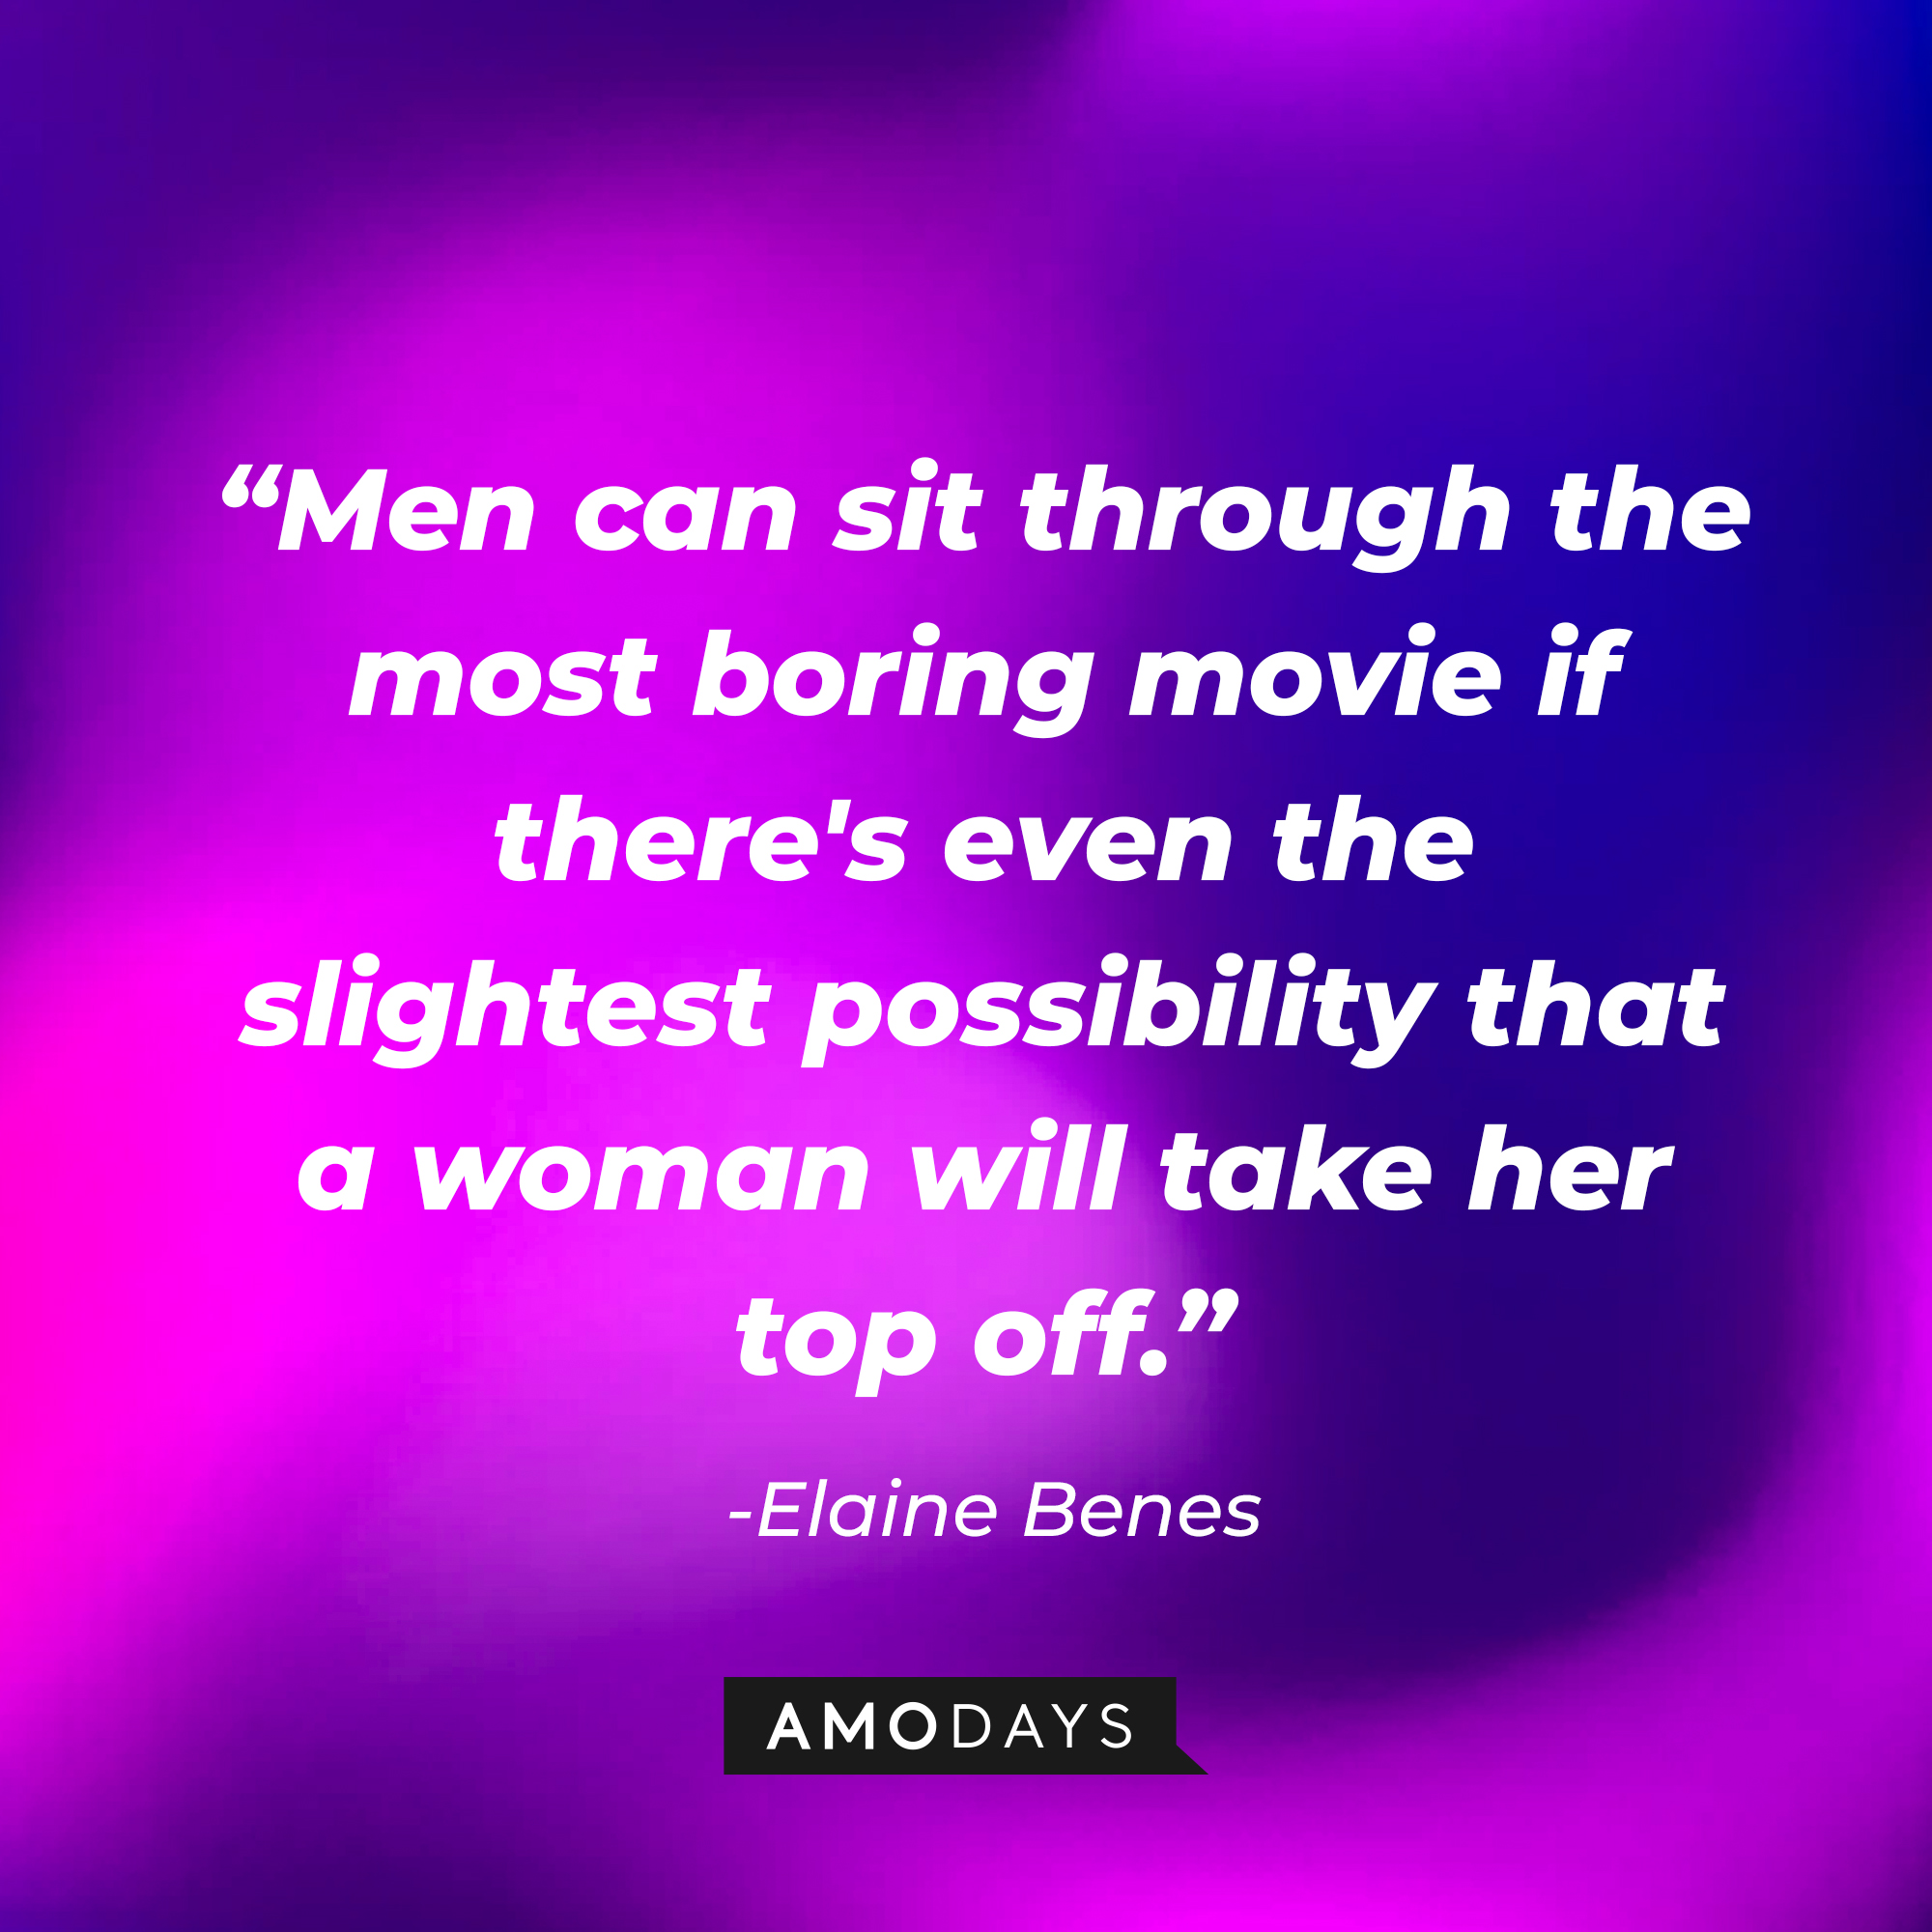 Elaine Benes quote: "Men can sit through the most boring movie if there's even the slightest possibility that a woman will take her top off." | Source: Amodays